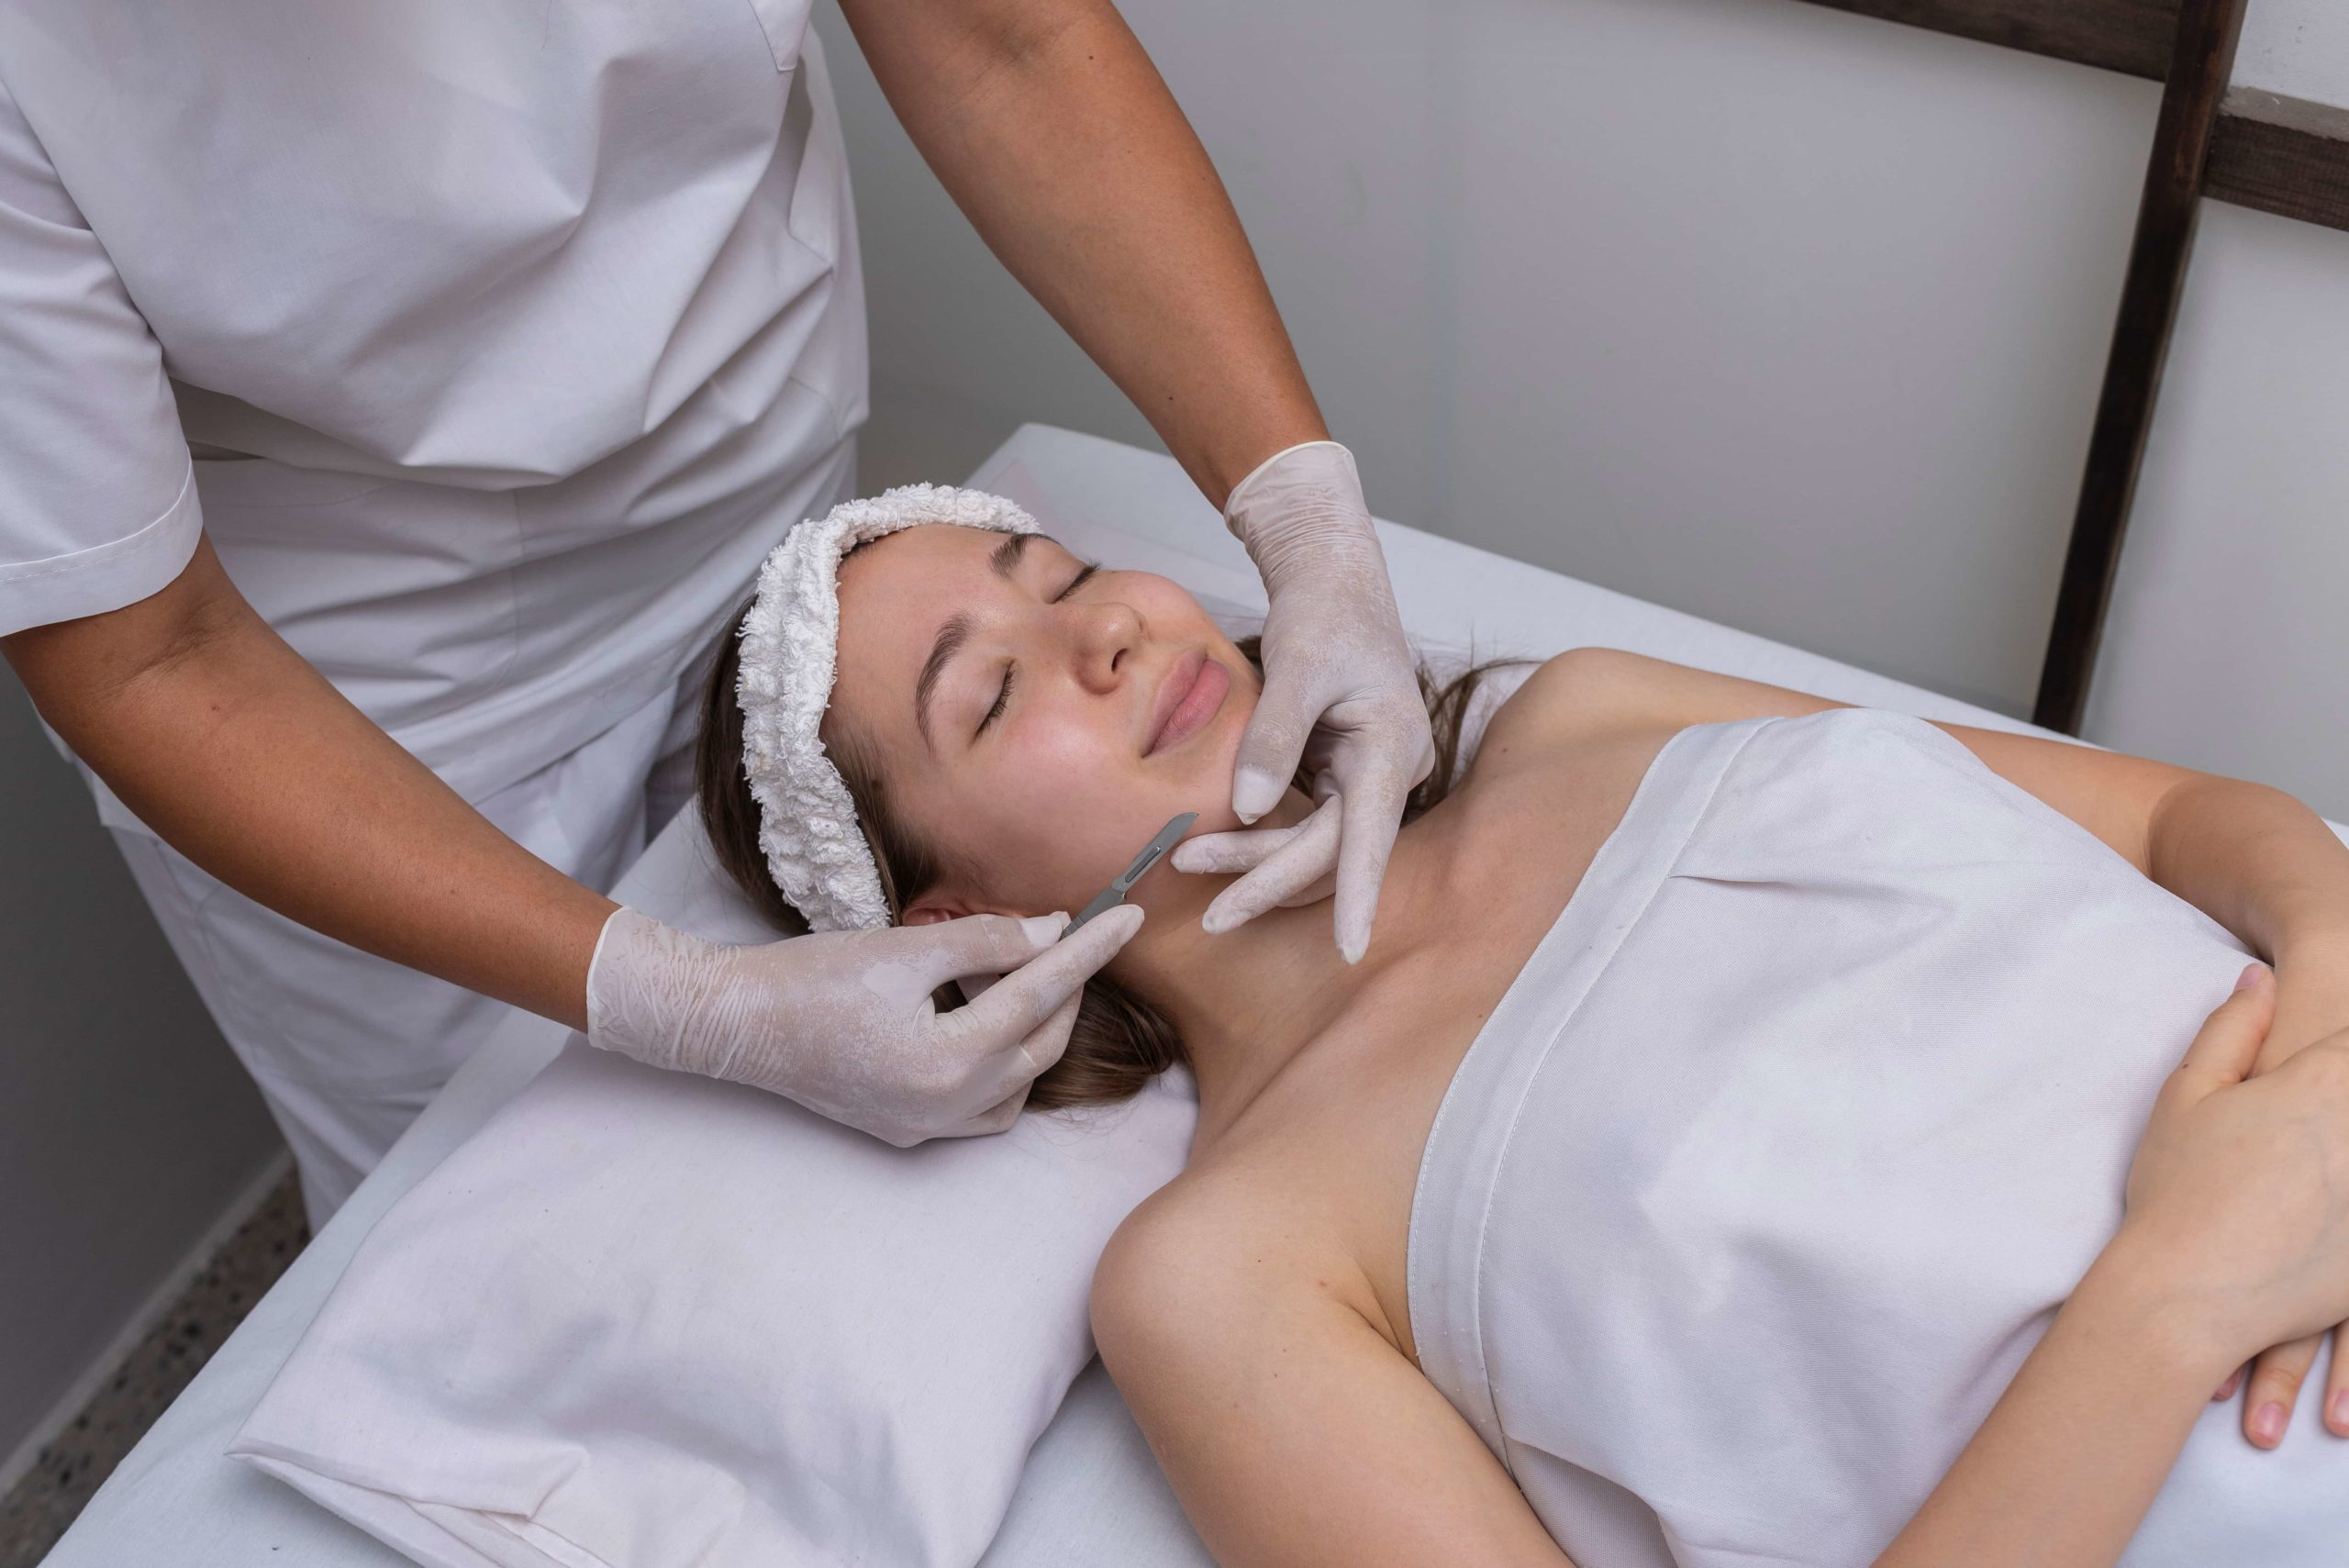 A Pretty lady is getting Dermaplanning Facial treatment | The BB Organics in West Hartford, CT.